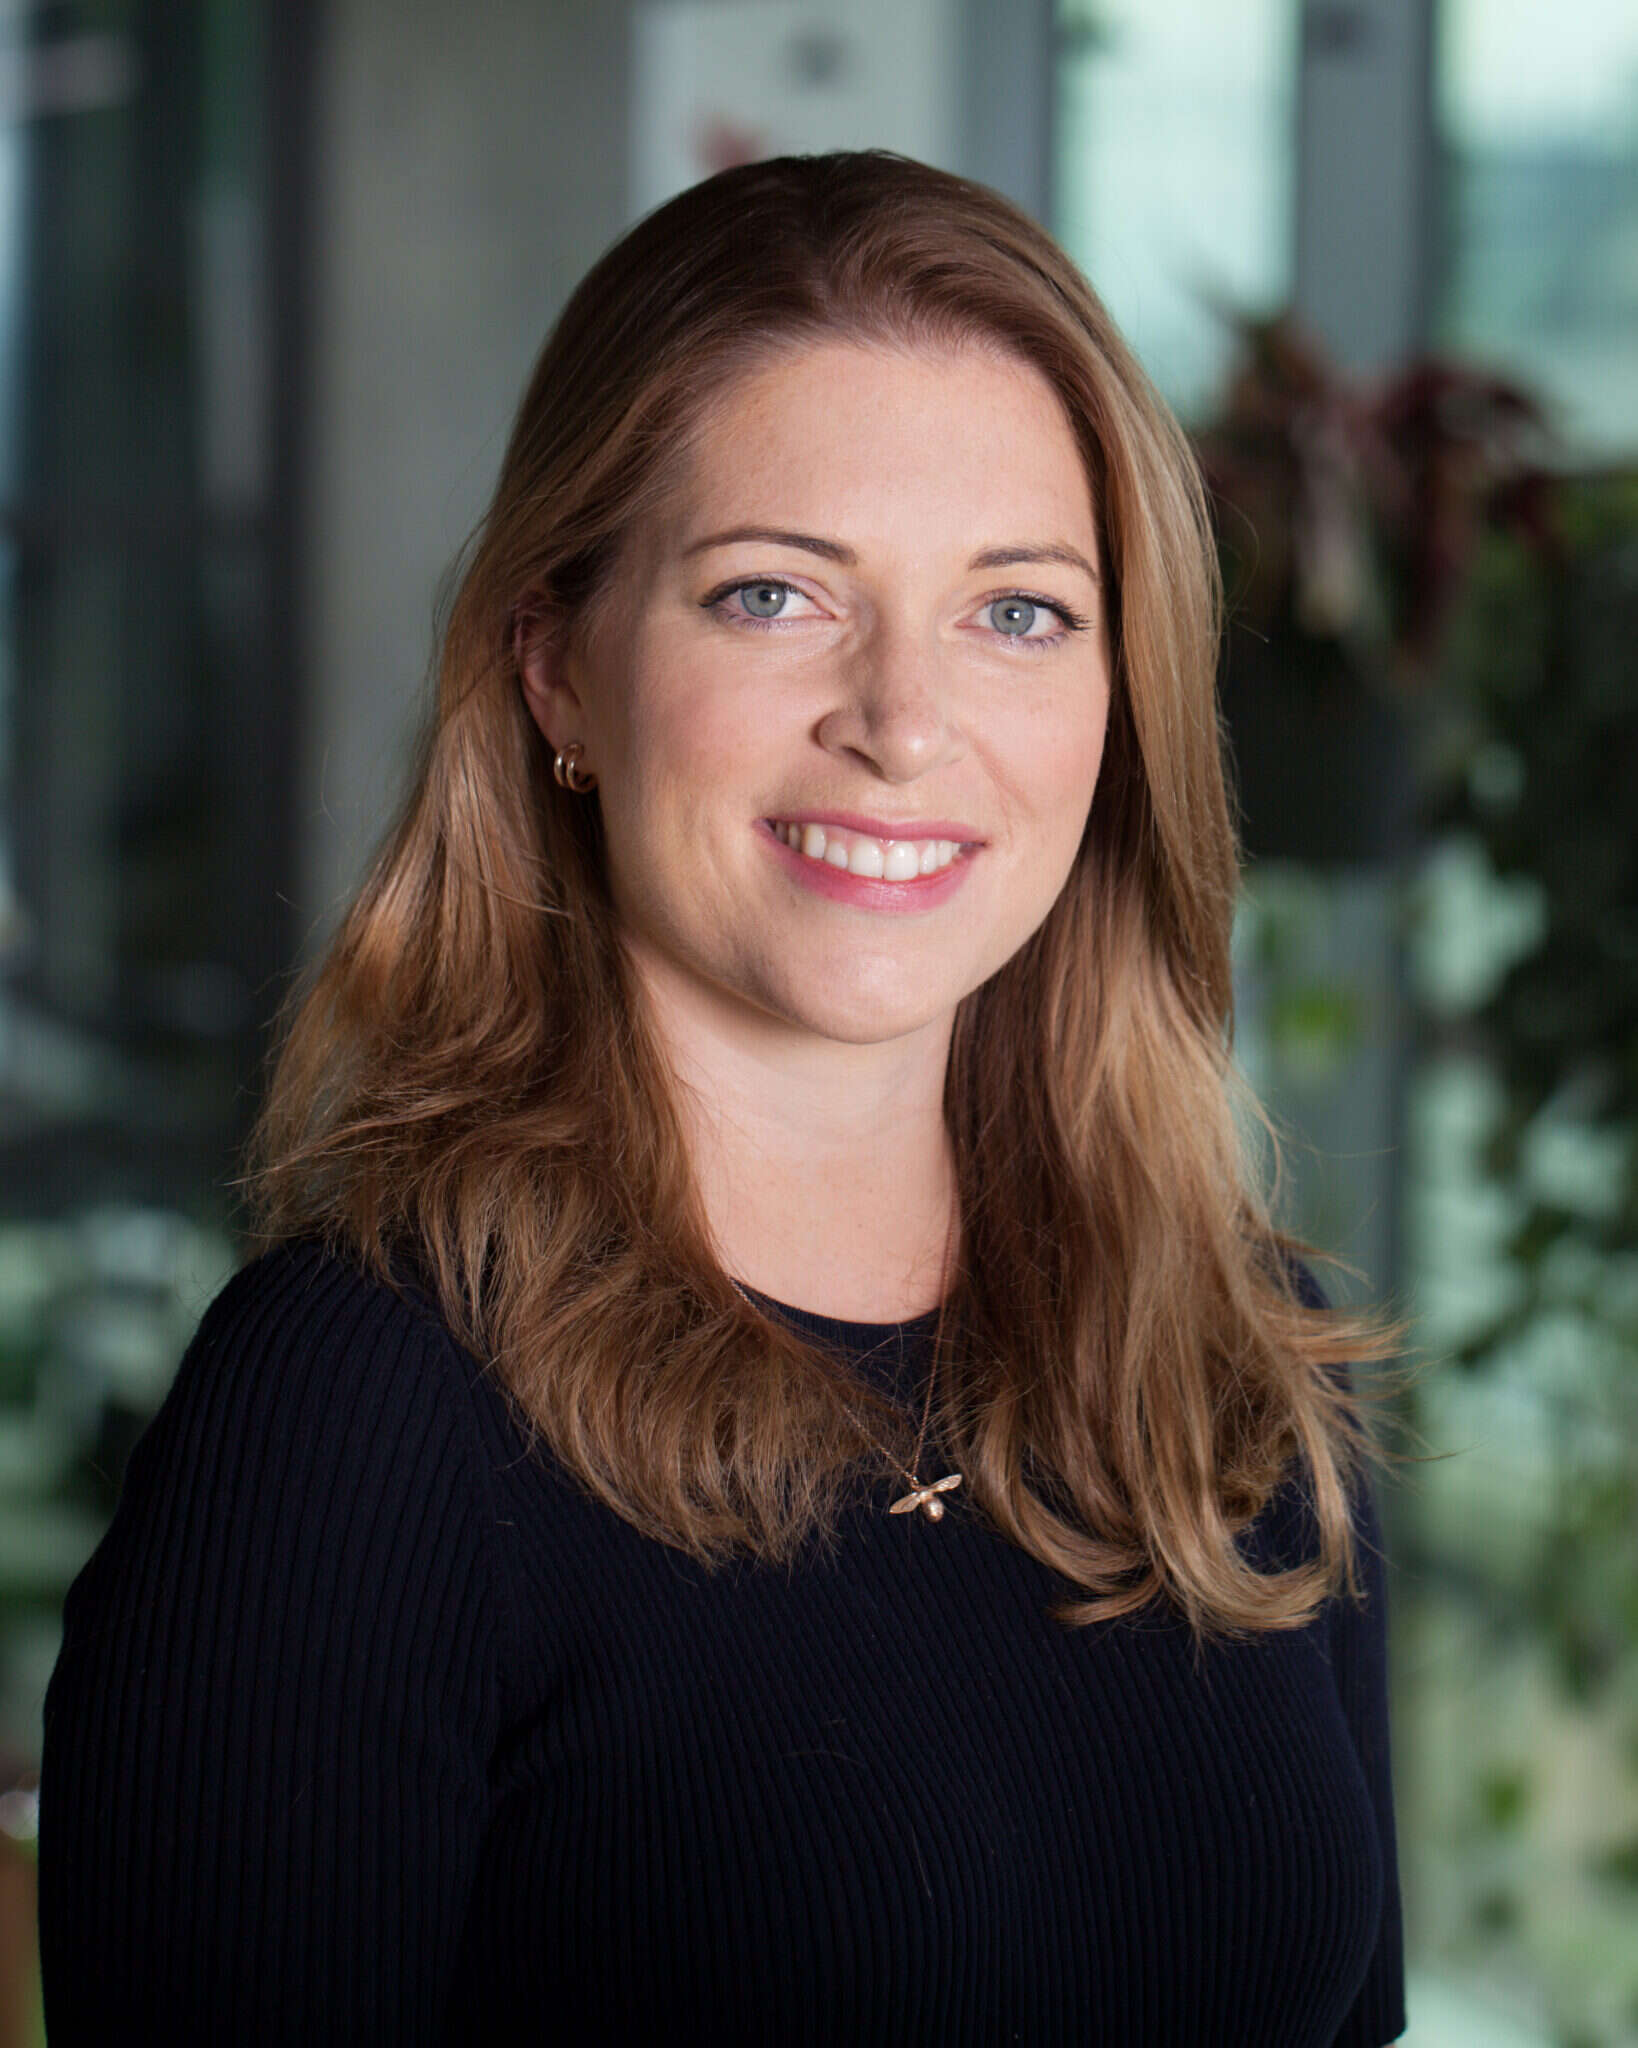 Five Questions with... Siobhan O’Reilly, UK Country Manager, Dropbox